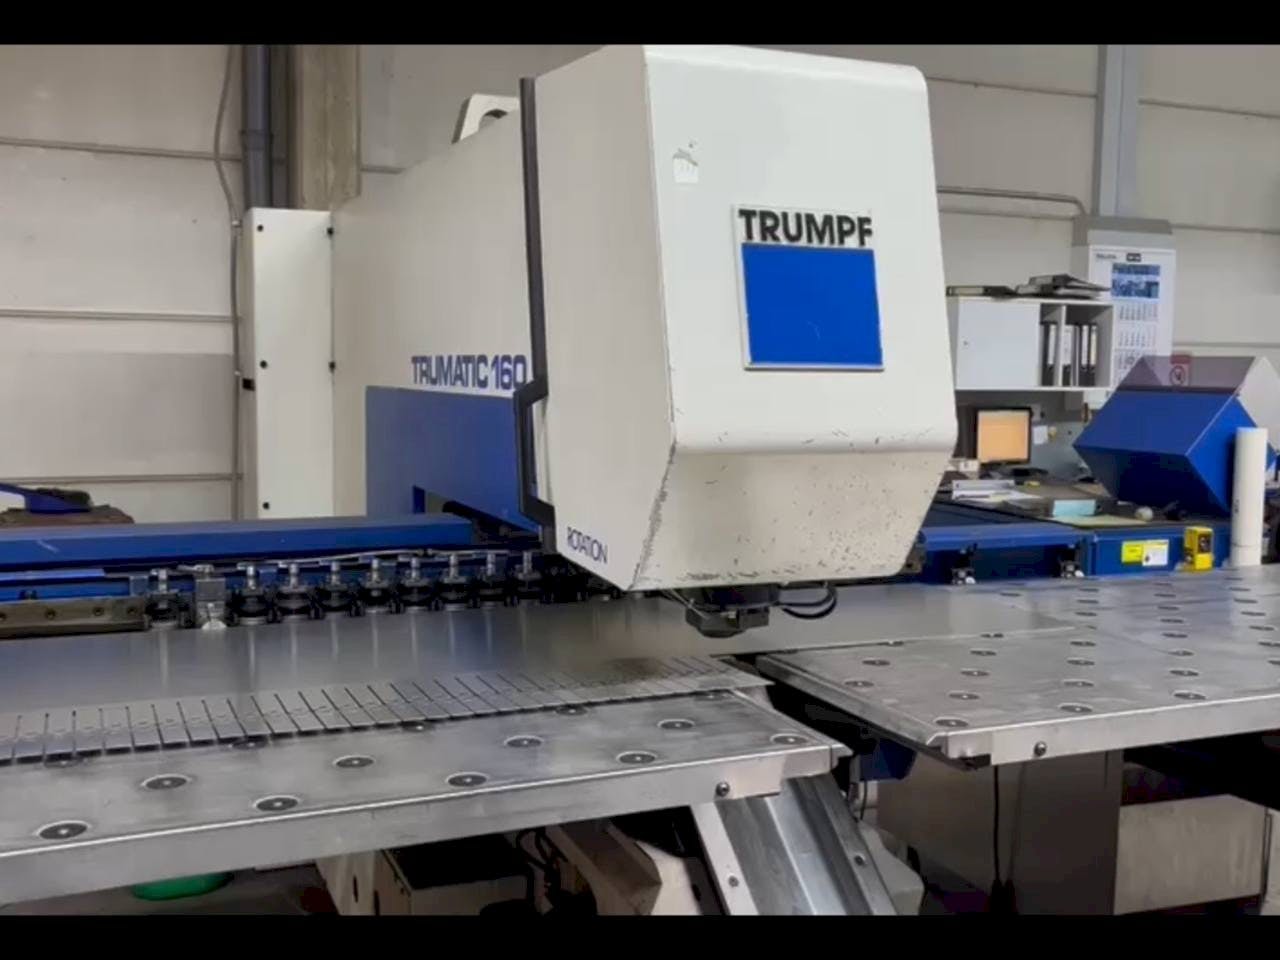 Front view of Trumpf Trumatic 160  machine